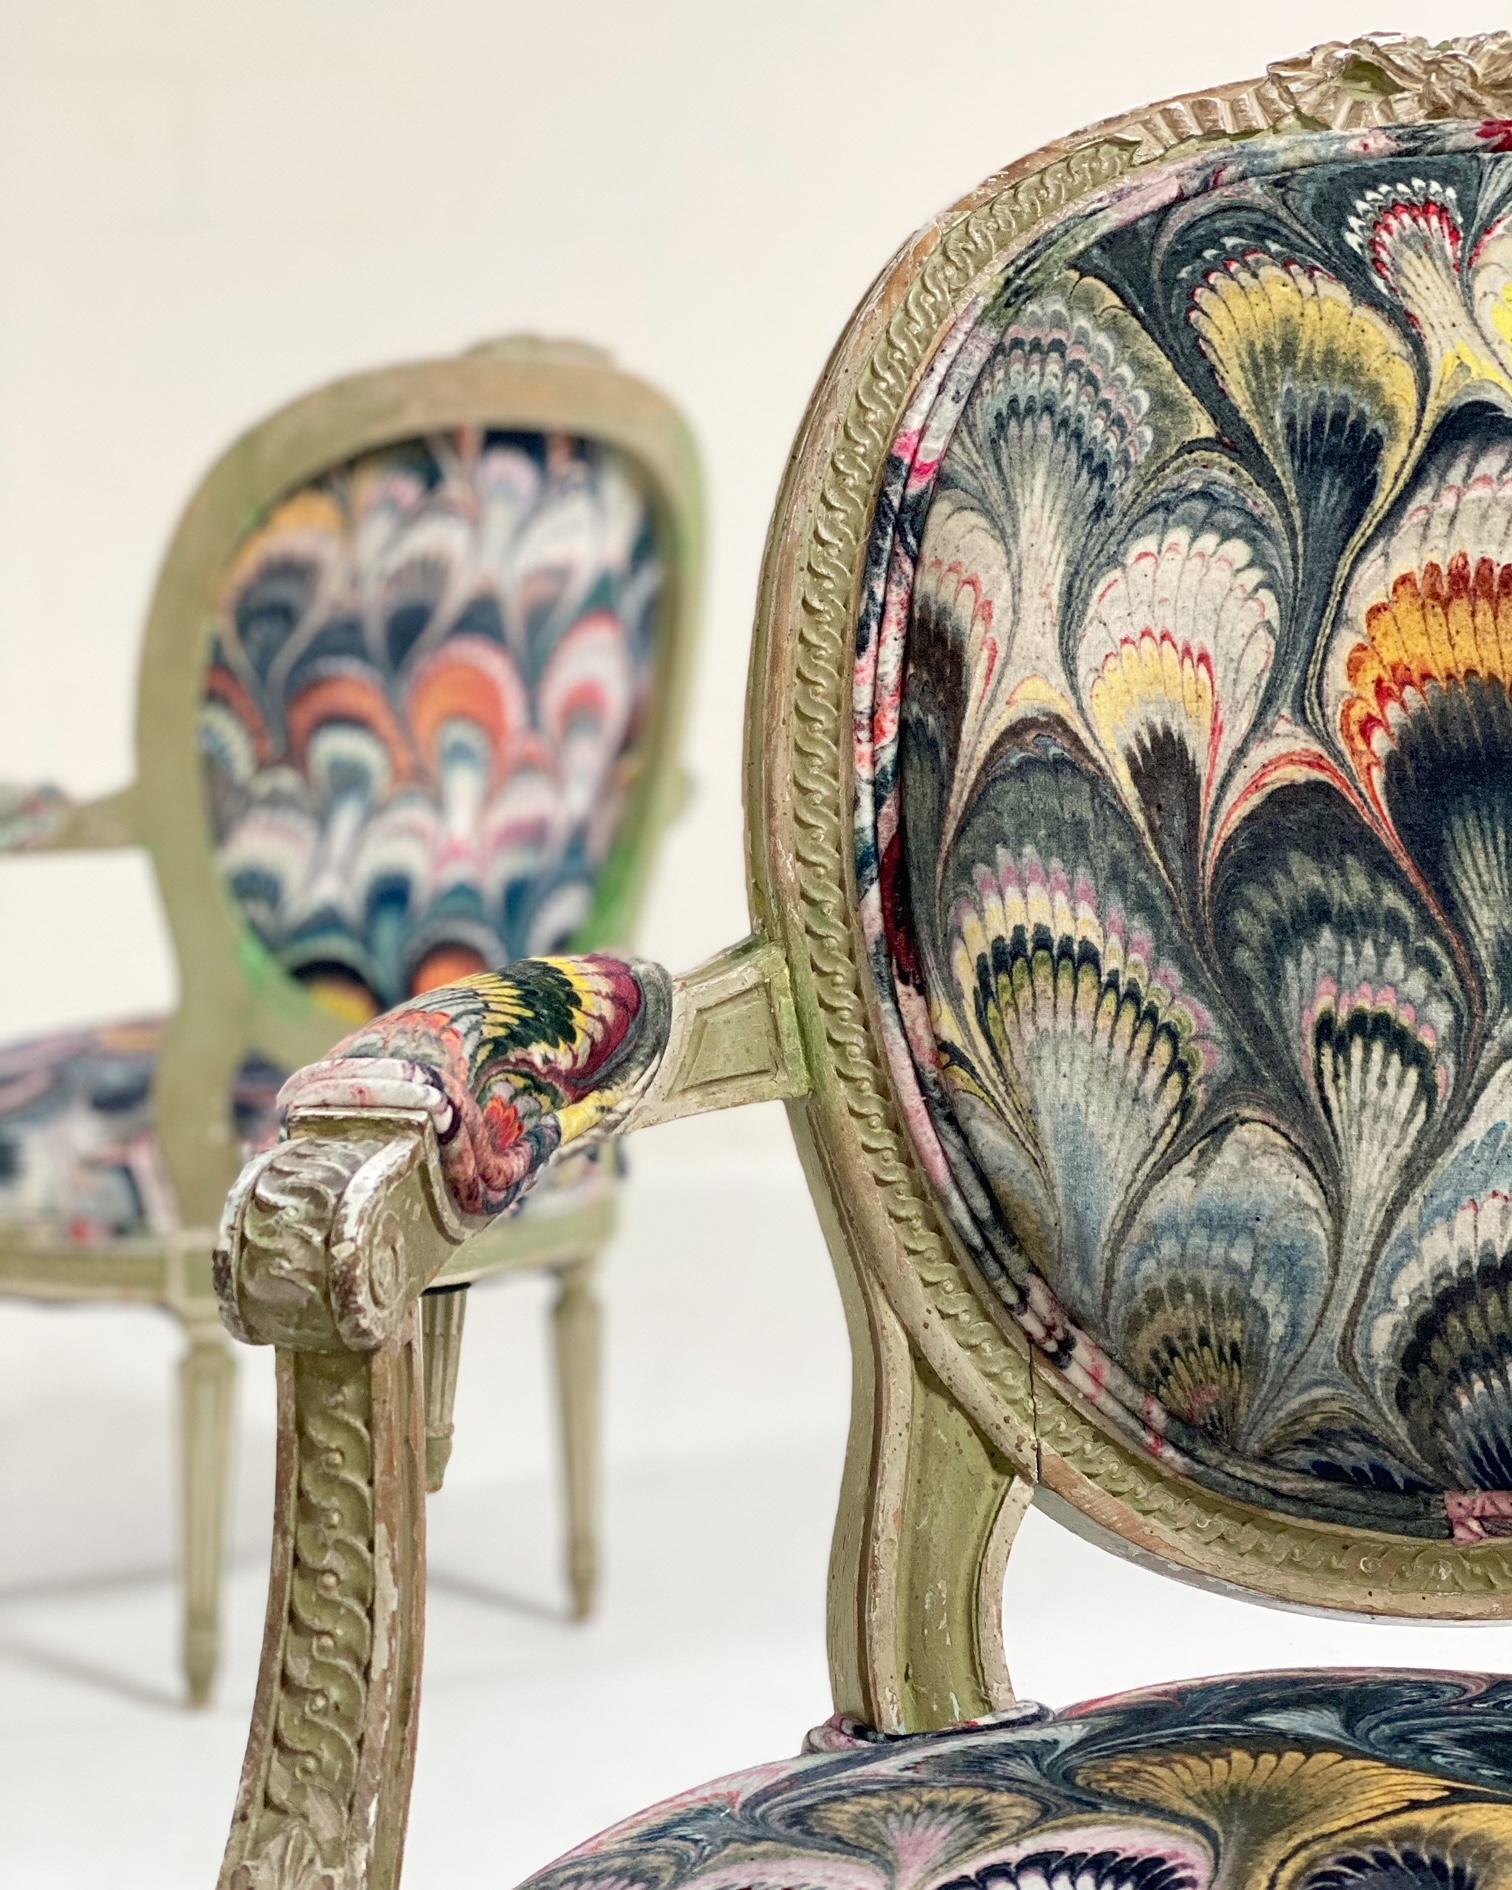 The green patina on these beautiful 18th century French chairs can't be duplicated. It's perfect. And the gorgeous pattern and colors of Beauta Heuman's 